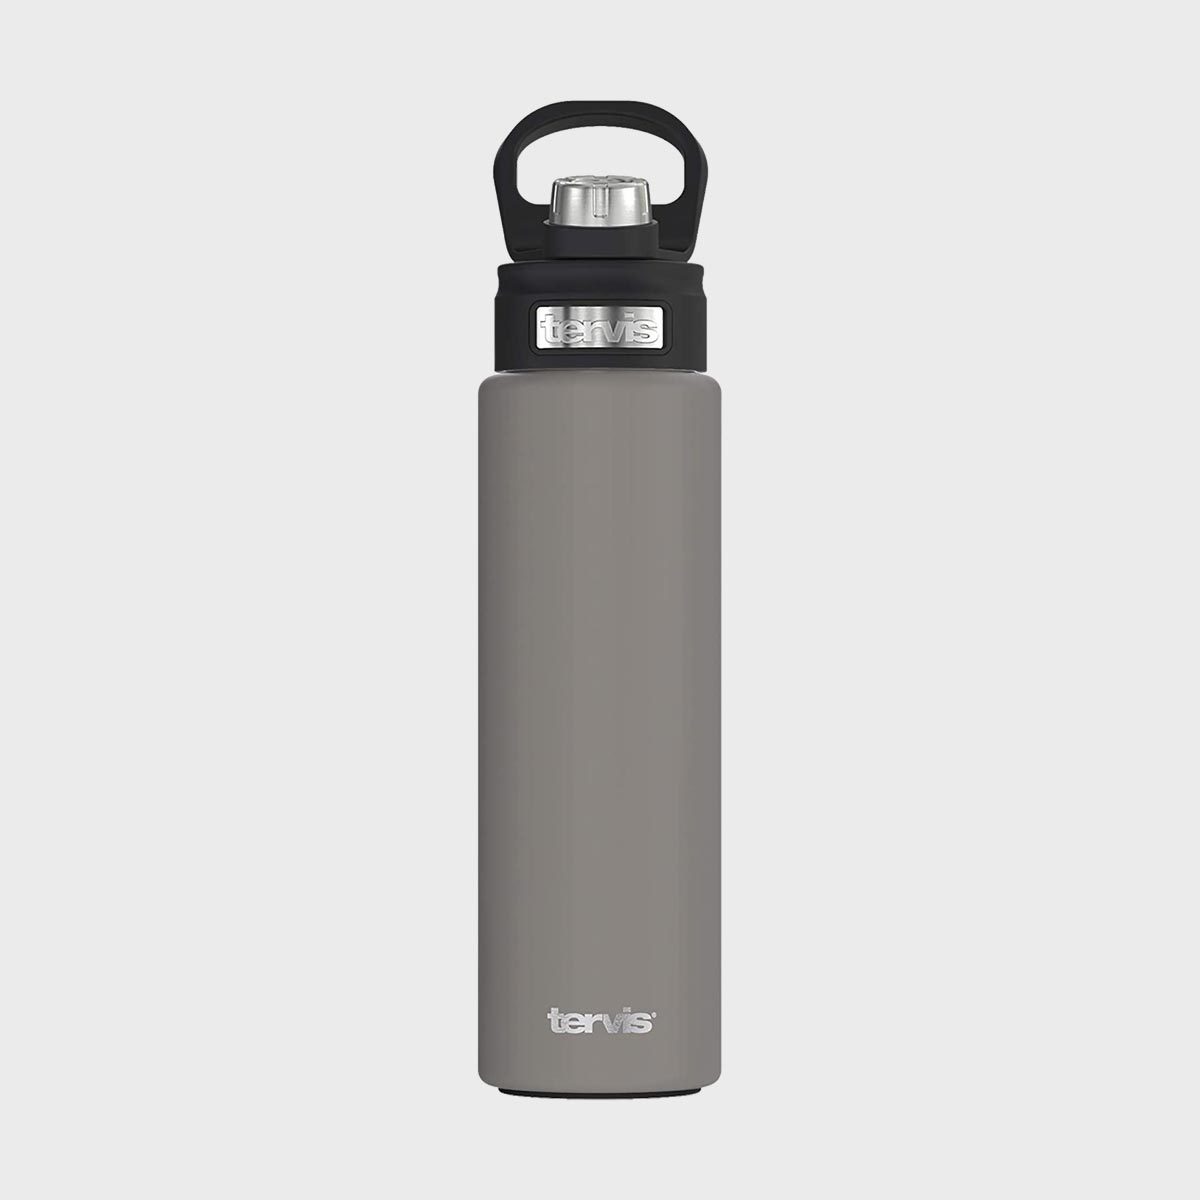 <p>When you're making your packing list, include this <a href="https://www.amazon.com/Tervis-Powder-Coated-Stainless-Steel/dp/B08XVGTF6W/" rel="noopener noreferrer">Tervis tumbler</a>. It's designed to keep drinks cold for up to 60 hours, and it's leak-proof, so you can toss it in your <a href="https://www.rd.com/article/best-backpacks/">backpack</a> without worrying about spills. Made of stainless steel, it won't retain odors or tastes, so you can quickly switch from using it as a coffee cup to carrying it as a water bottle.</p> <p class="listicle-page__cta-button-shop"><a class="shop-btn" href="https://www.amazon.com/Tervis-Powder-Coated-Stainless-Steel/dp/B08XVGTF6W/">Shop Now</a></p>